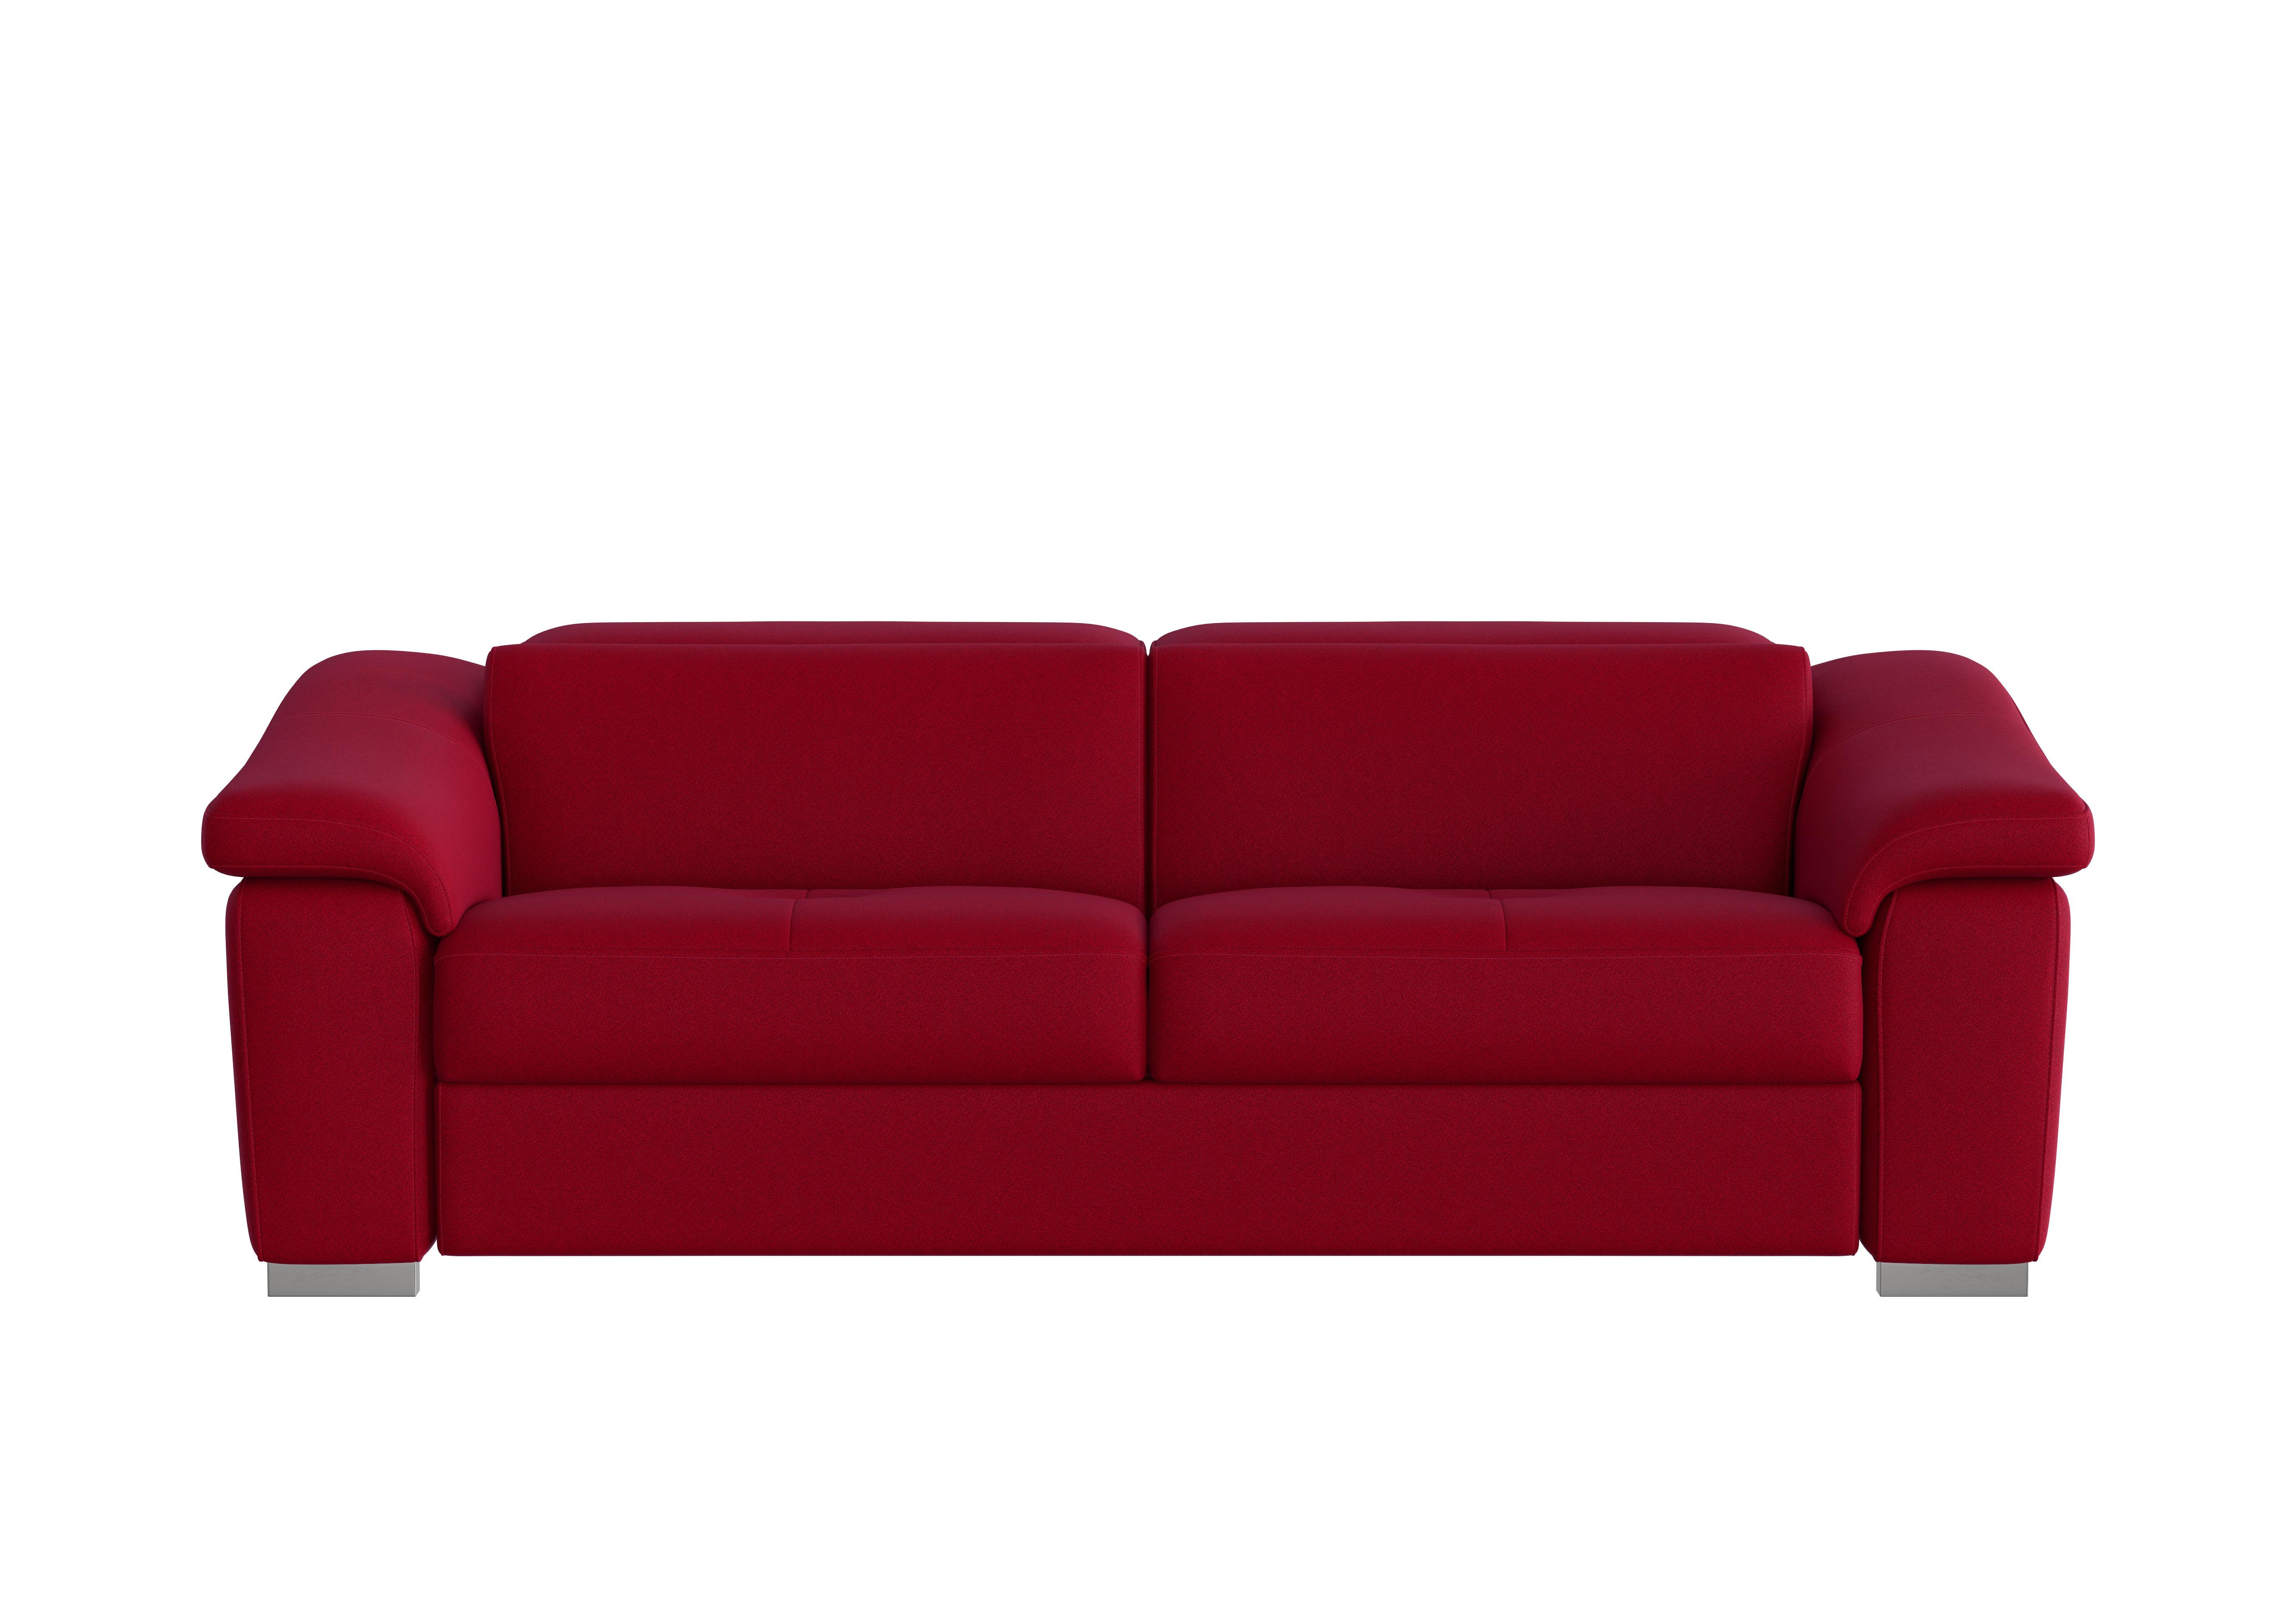 Galileo 3 Seater Fabric Sofa in Coupe Rosso 305 Ch on Furniture Village